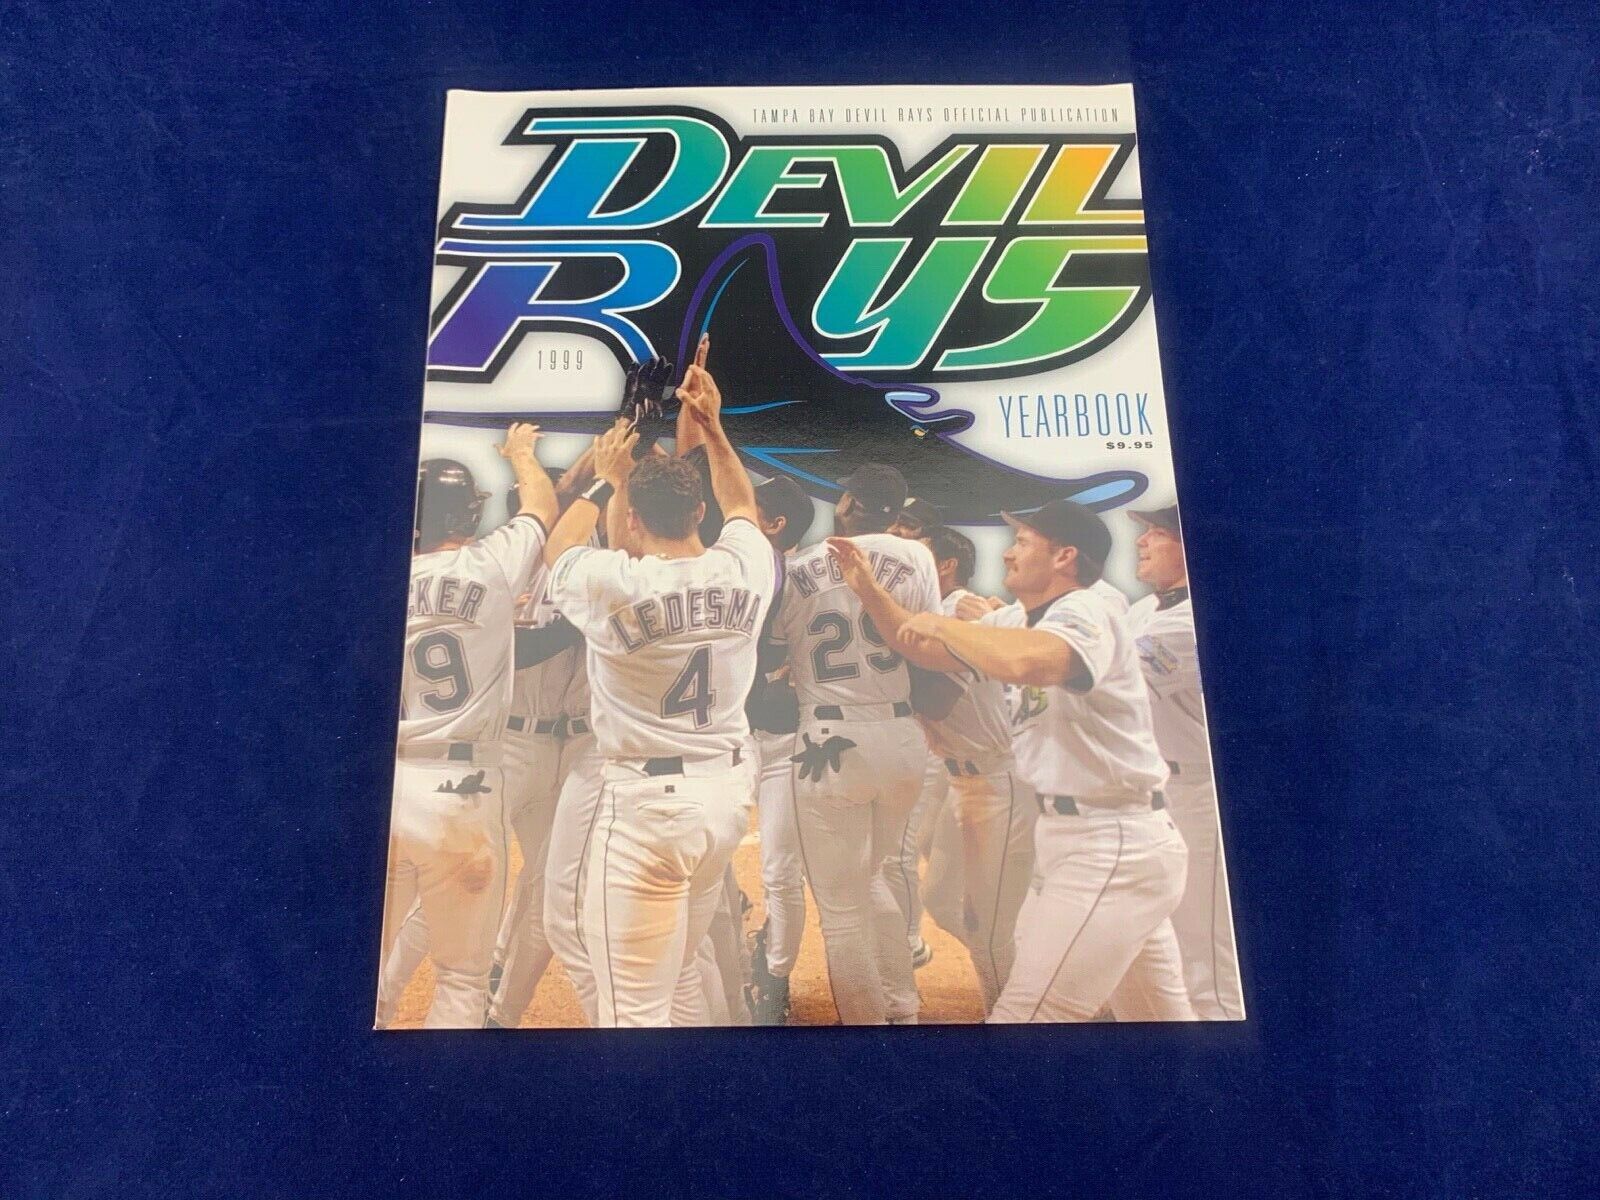 Tampa Day Devils Rays 1999 Official Yearbook Publication Boggs McGriff